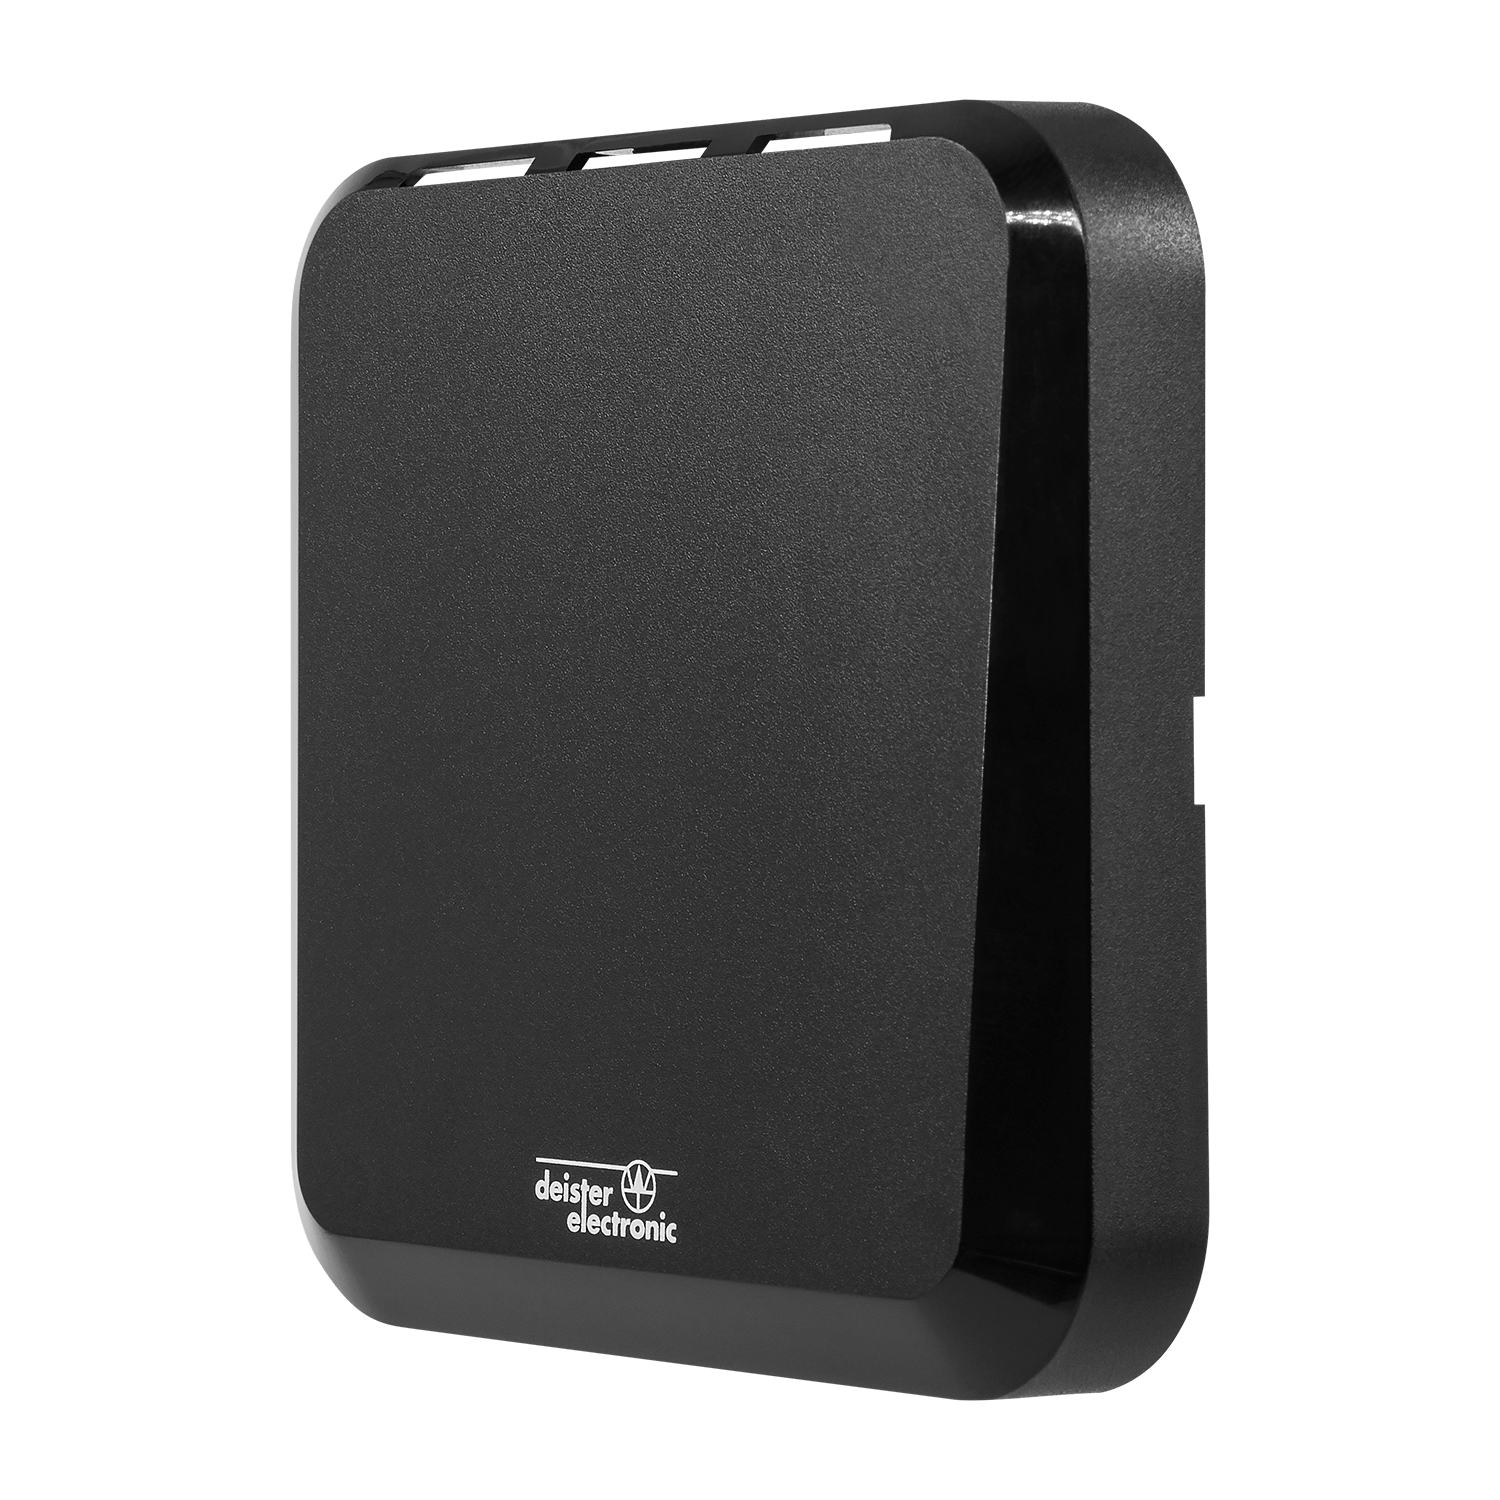 CCS 6 black cover for access control reader, right view